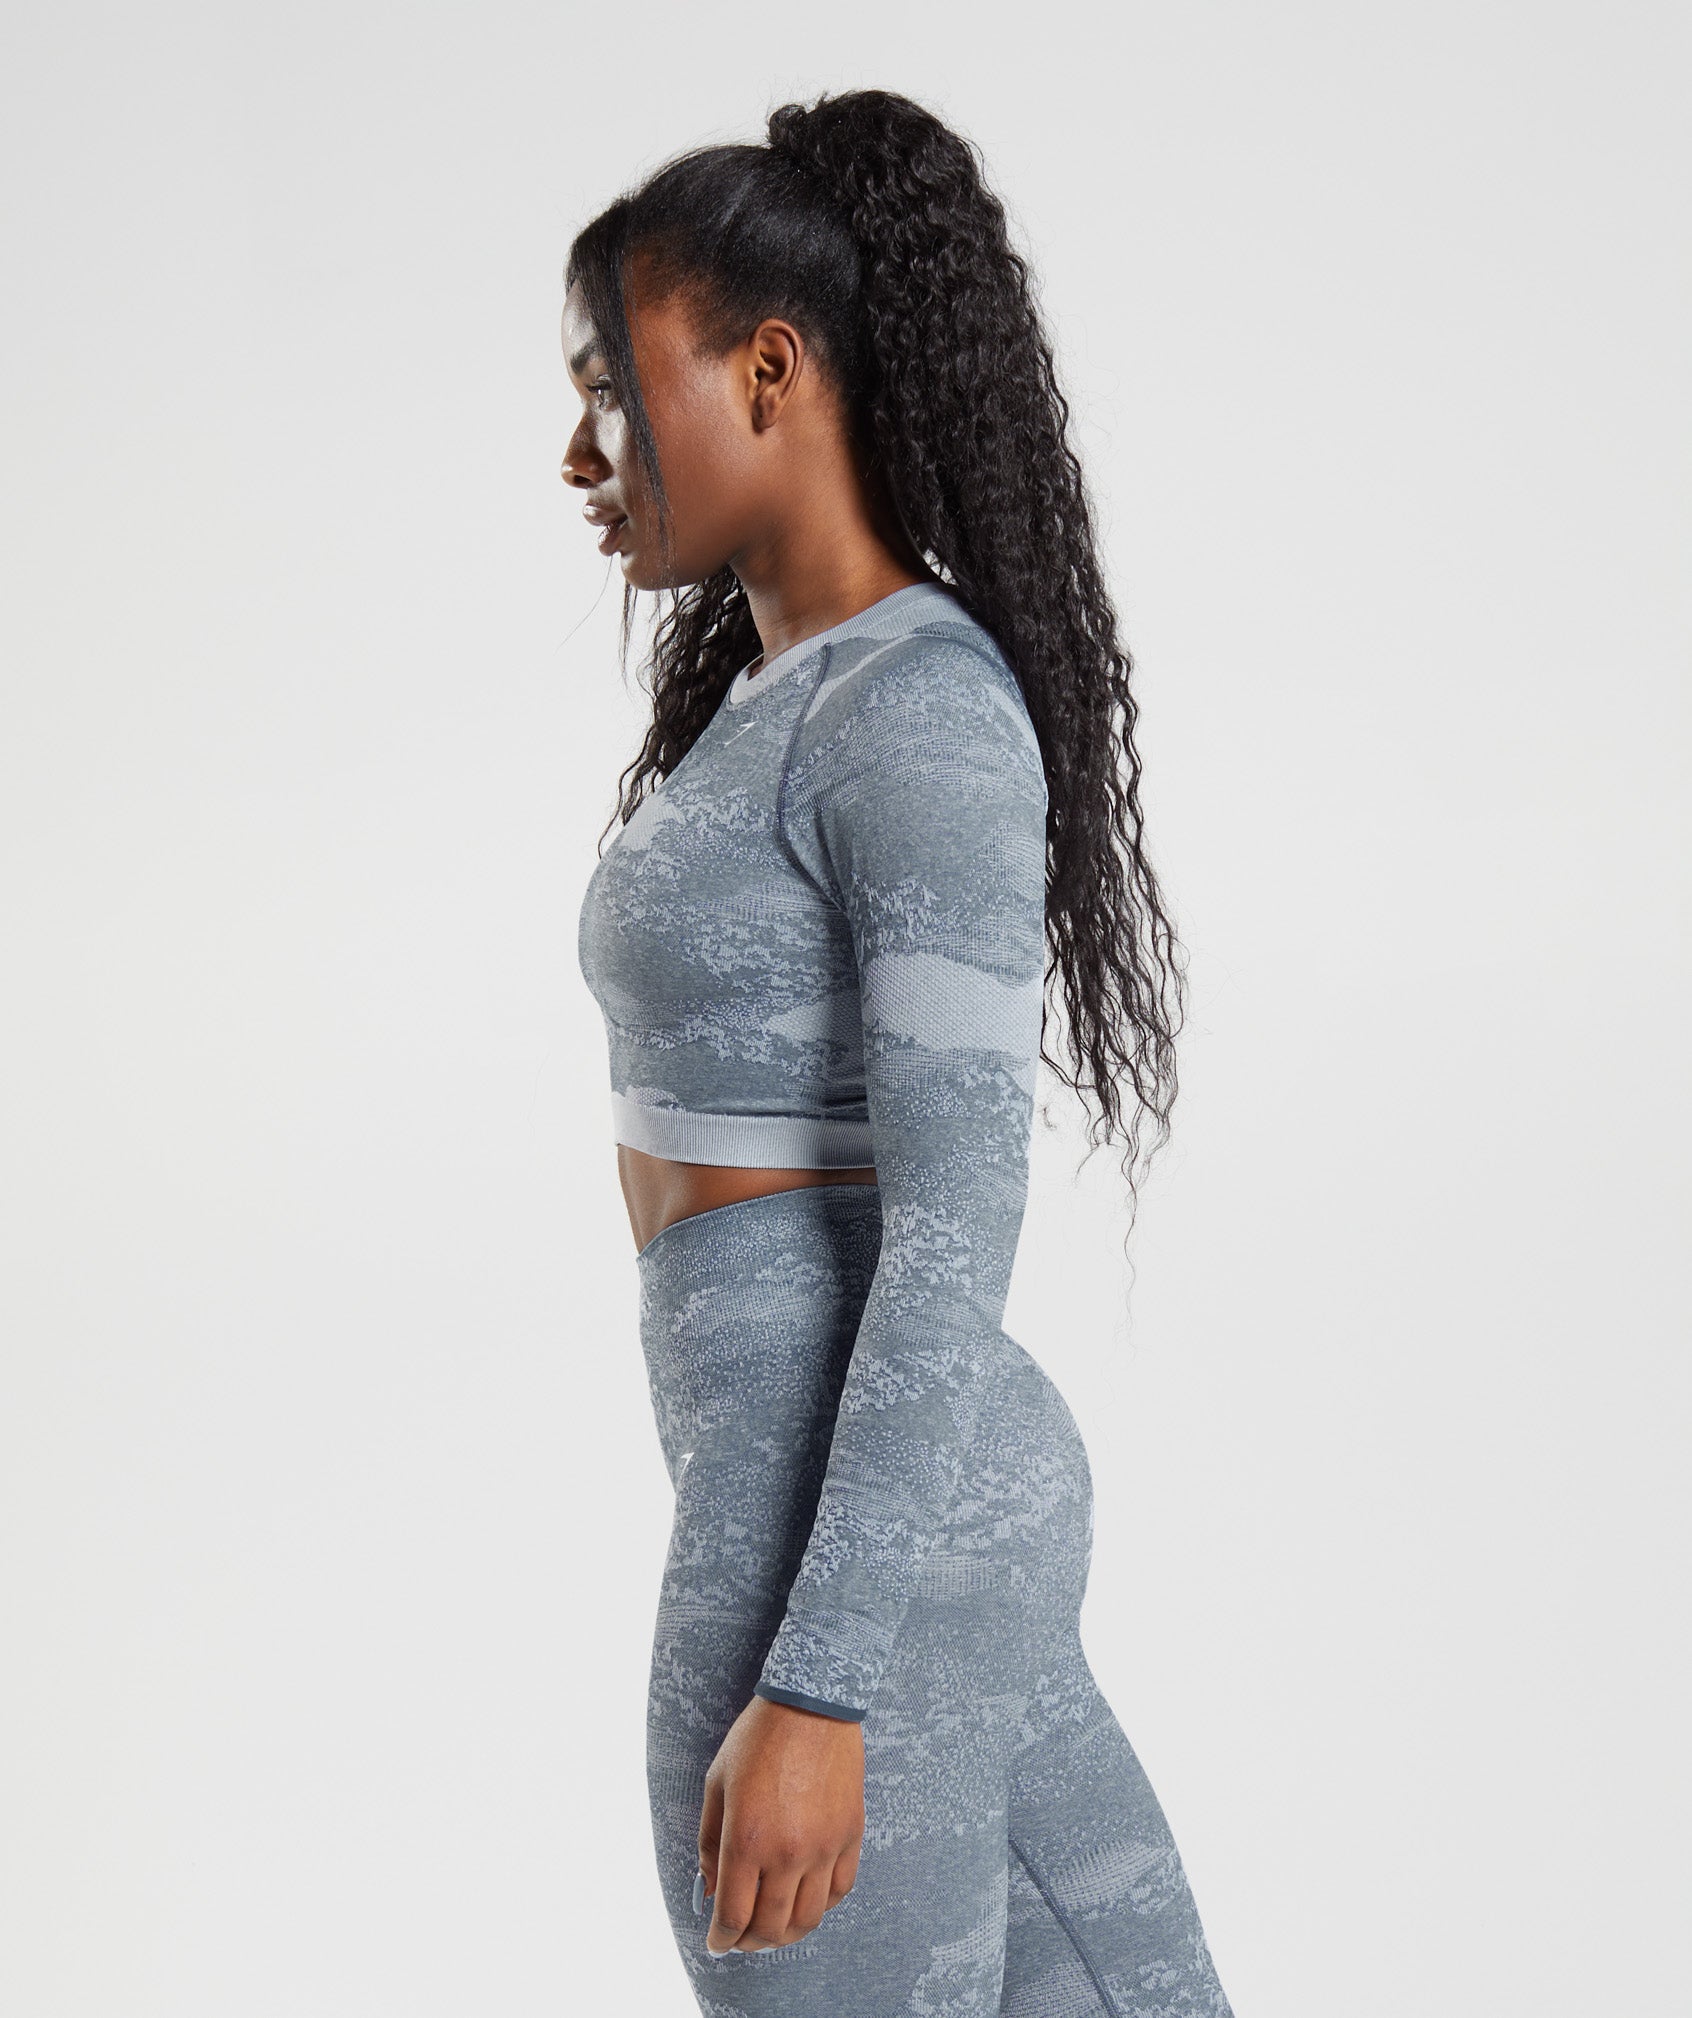 Gymshark Camo Seamless Set Purple - $90 (21% Off Retail) New With Tags -  From Victoria